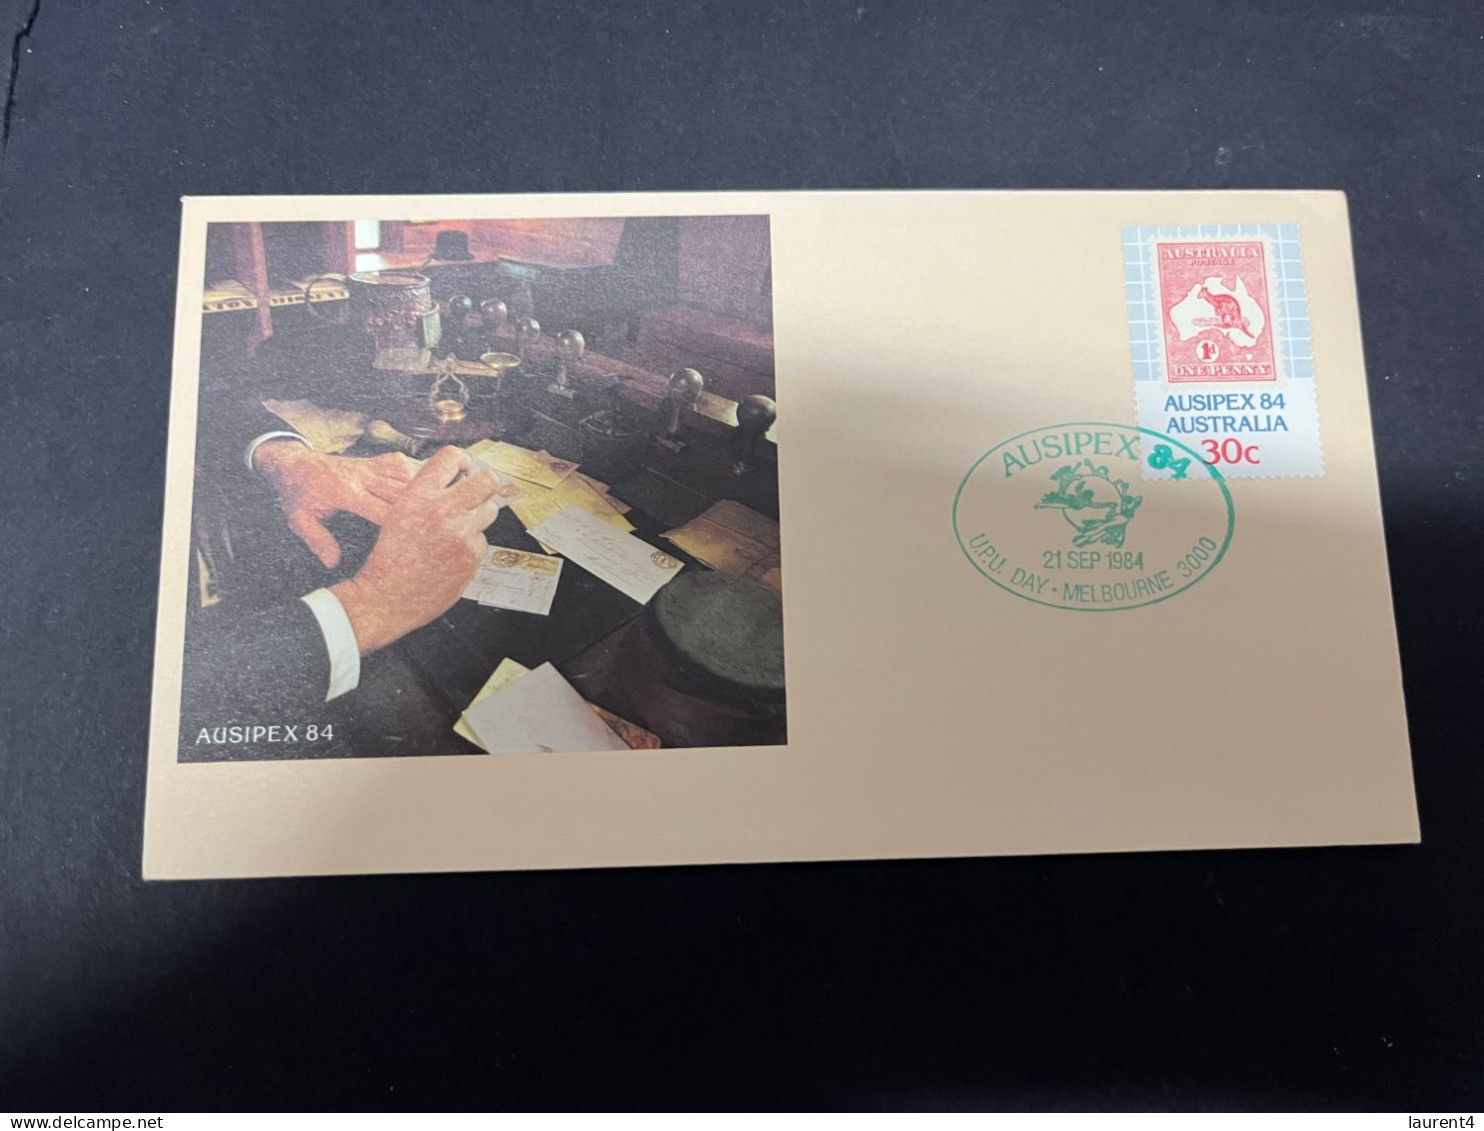 26-3-2024 (4 Y 9) Australia (5 With With Different Postmark) FDC - AUSSIPEX 84 (Melbourne Stamp Expo) - Sobre Primer Día (FDC)